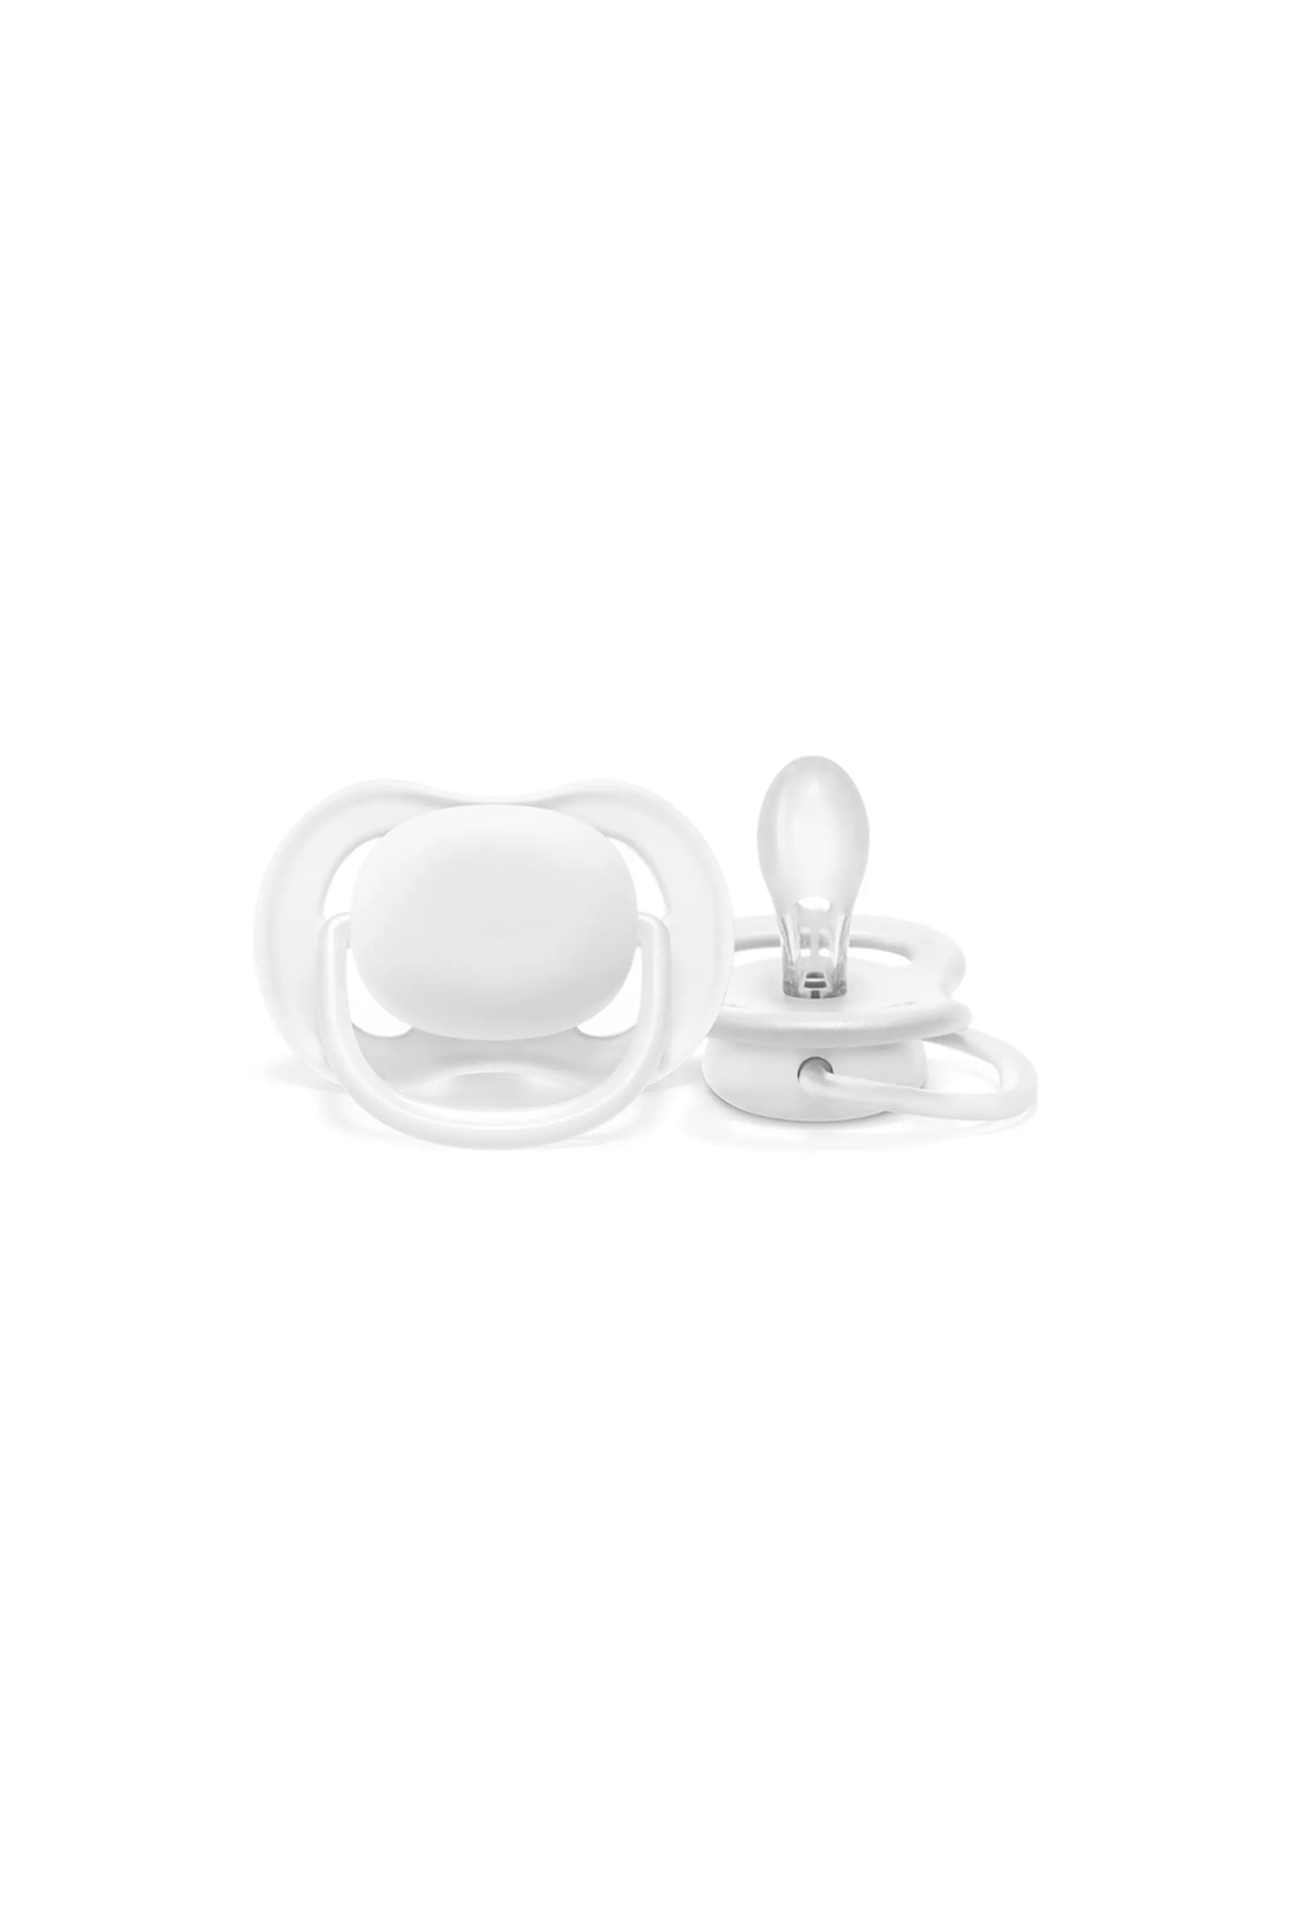  Philips AVENT Chupete Ultra Air, 6-18 meses